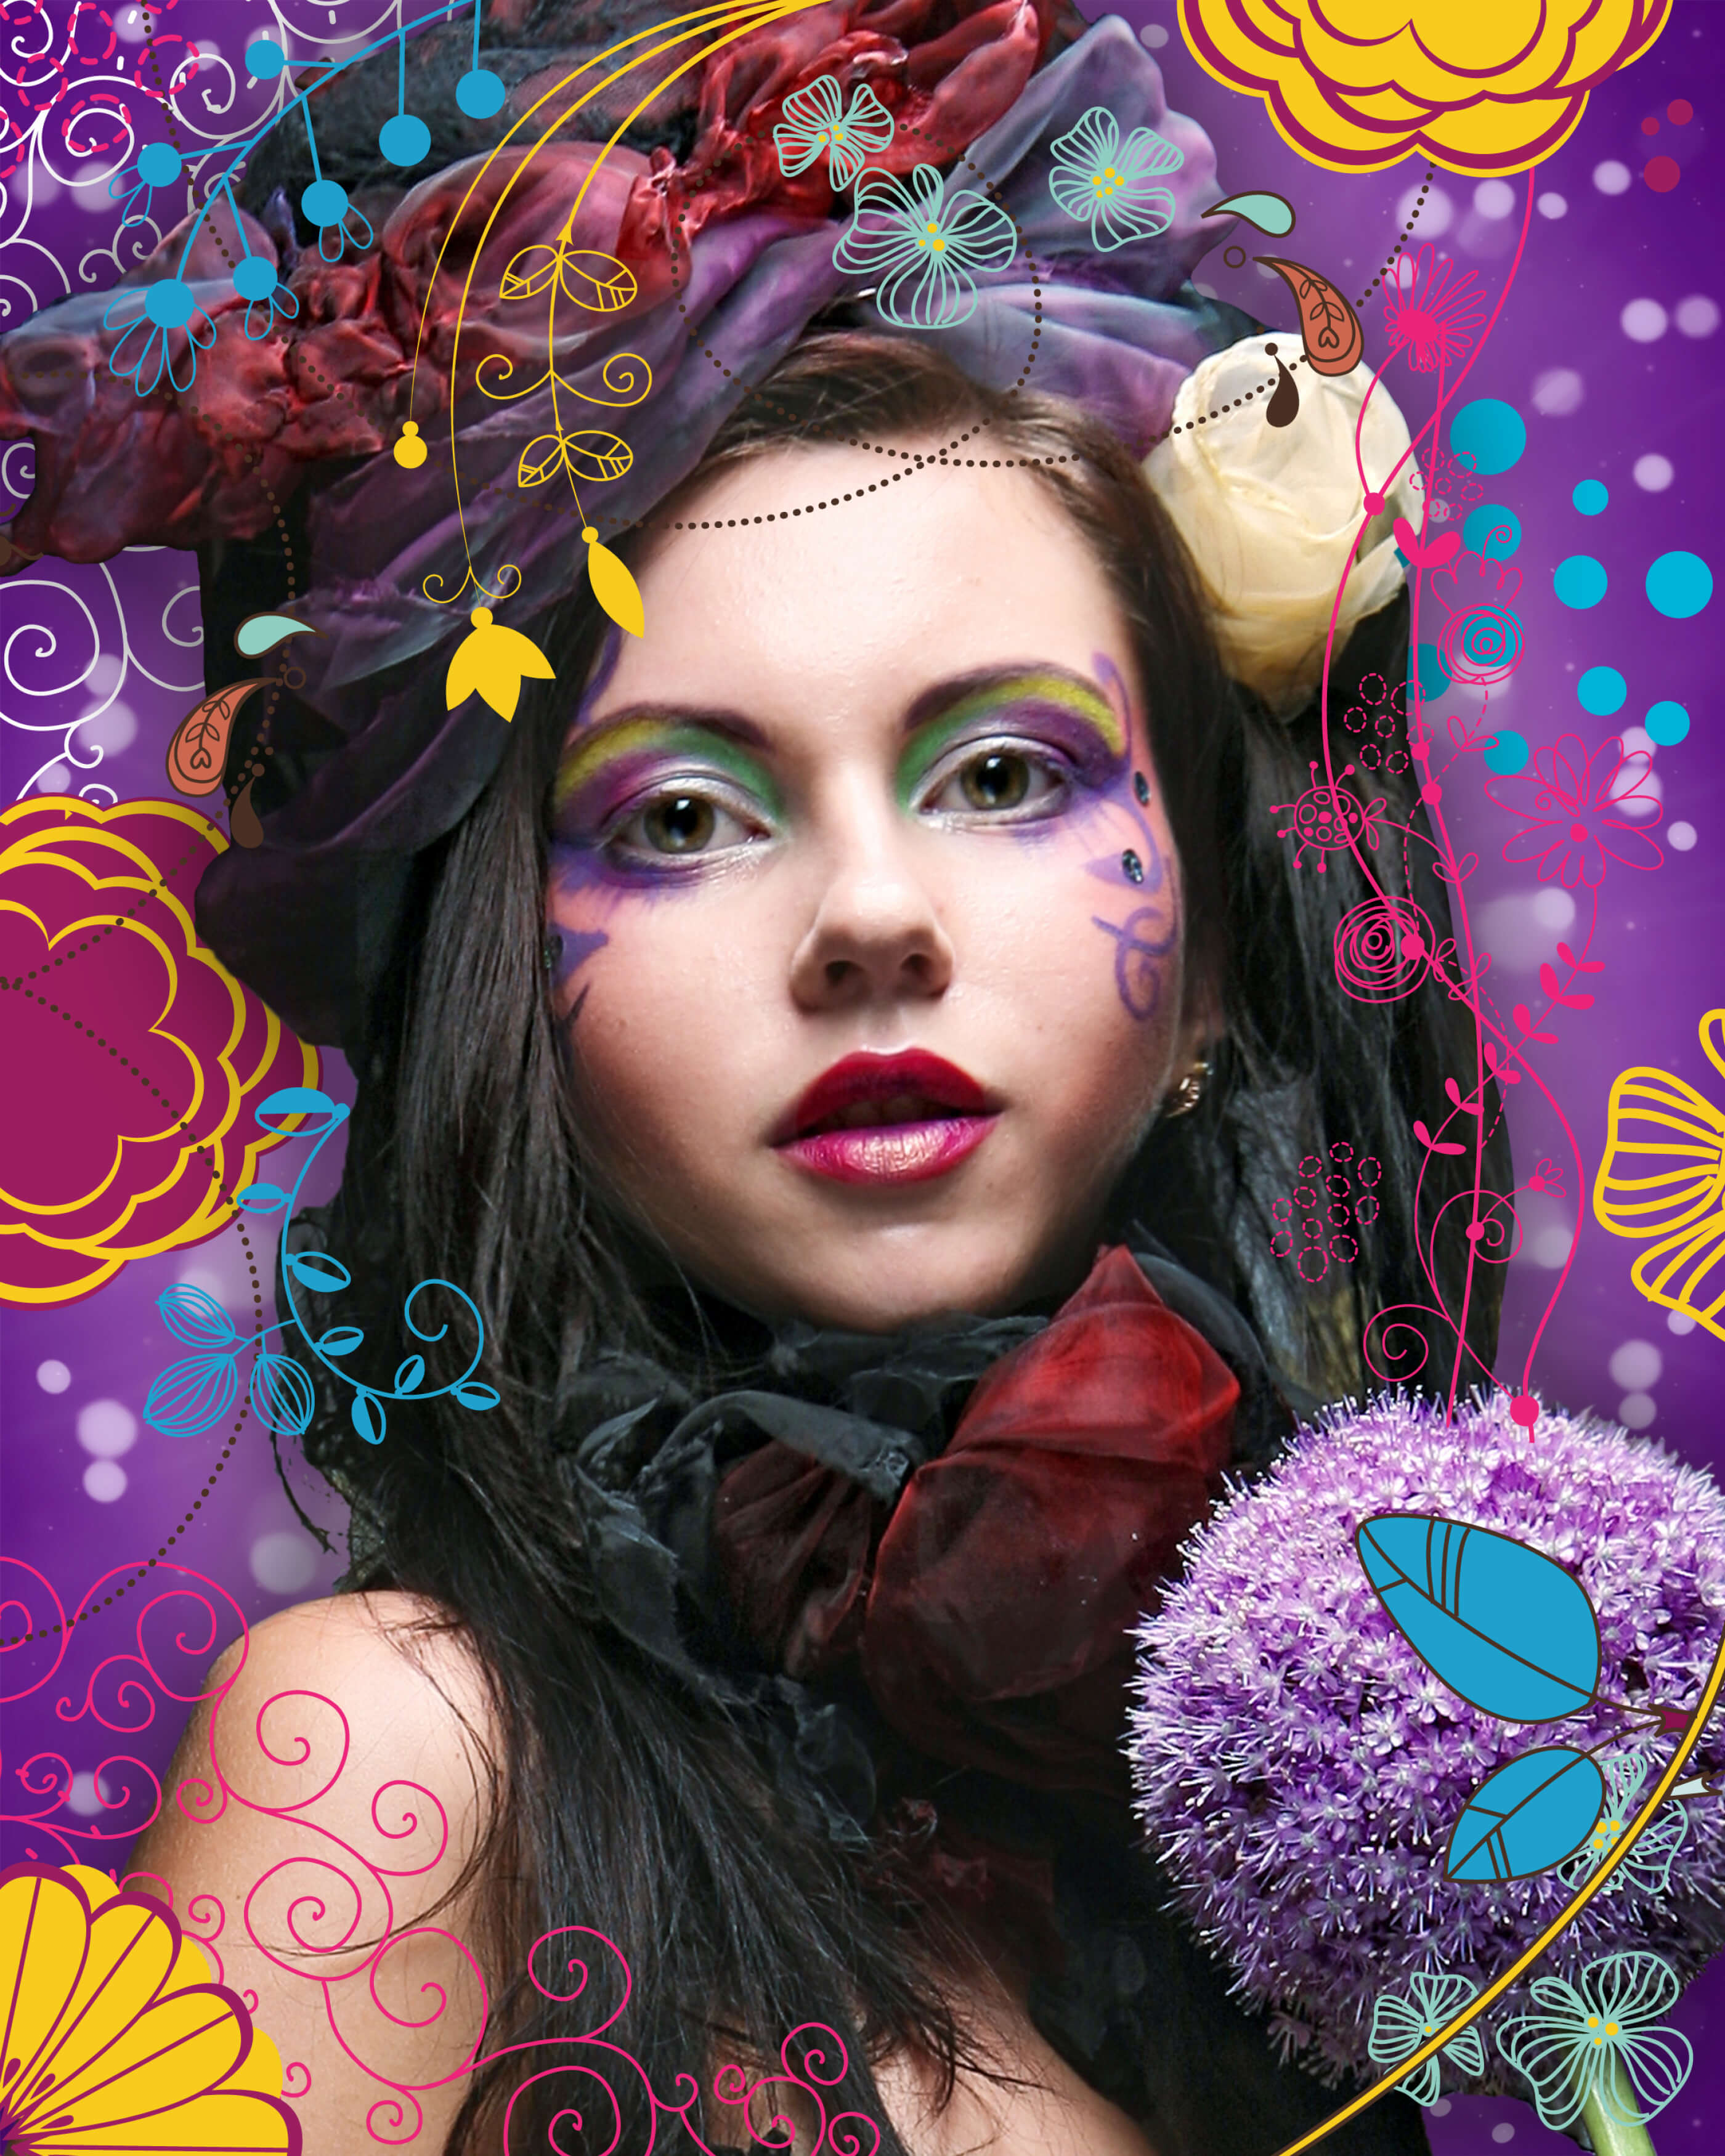 Female model facing the camera wearing heavy, colourful make up with a white rose in her hair. Bright illustrations of flowers and foliage form a frame around her, on a purple background